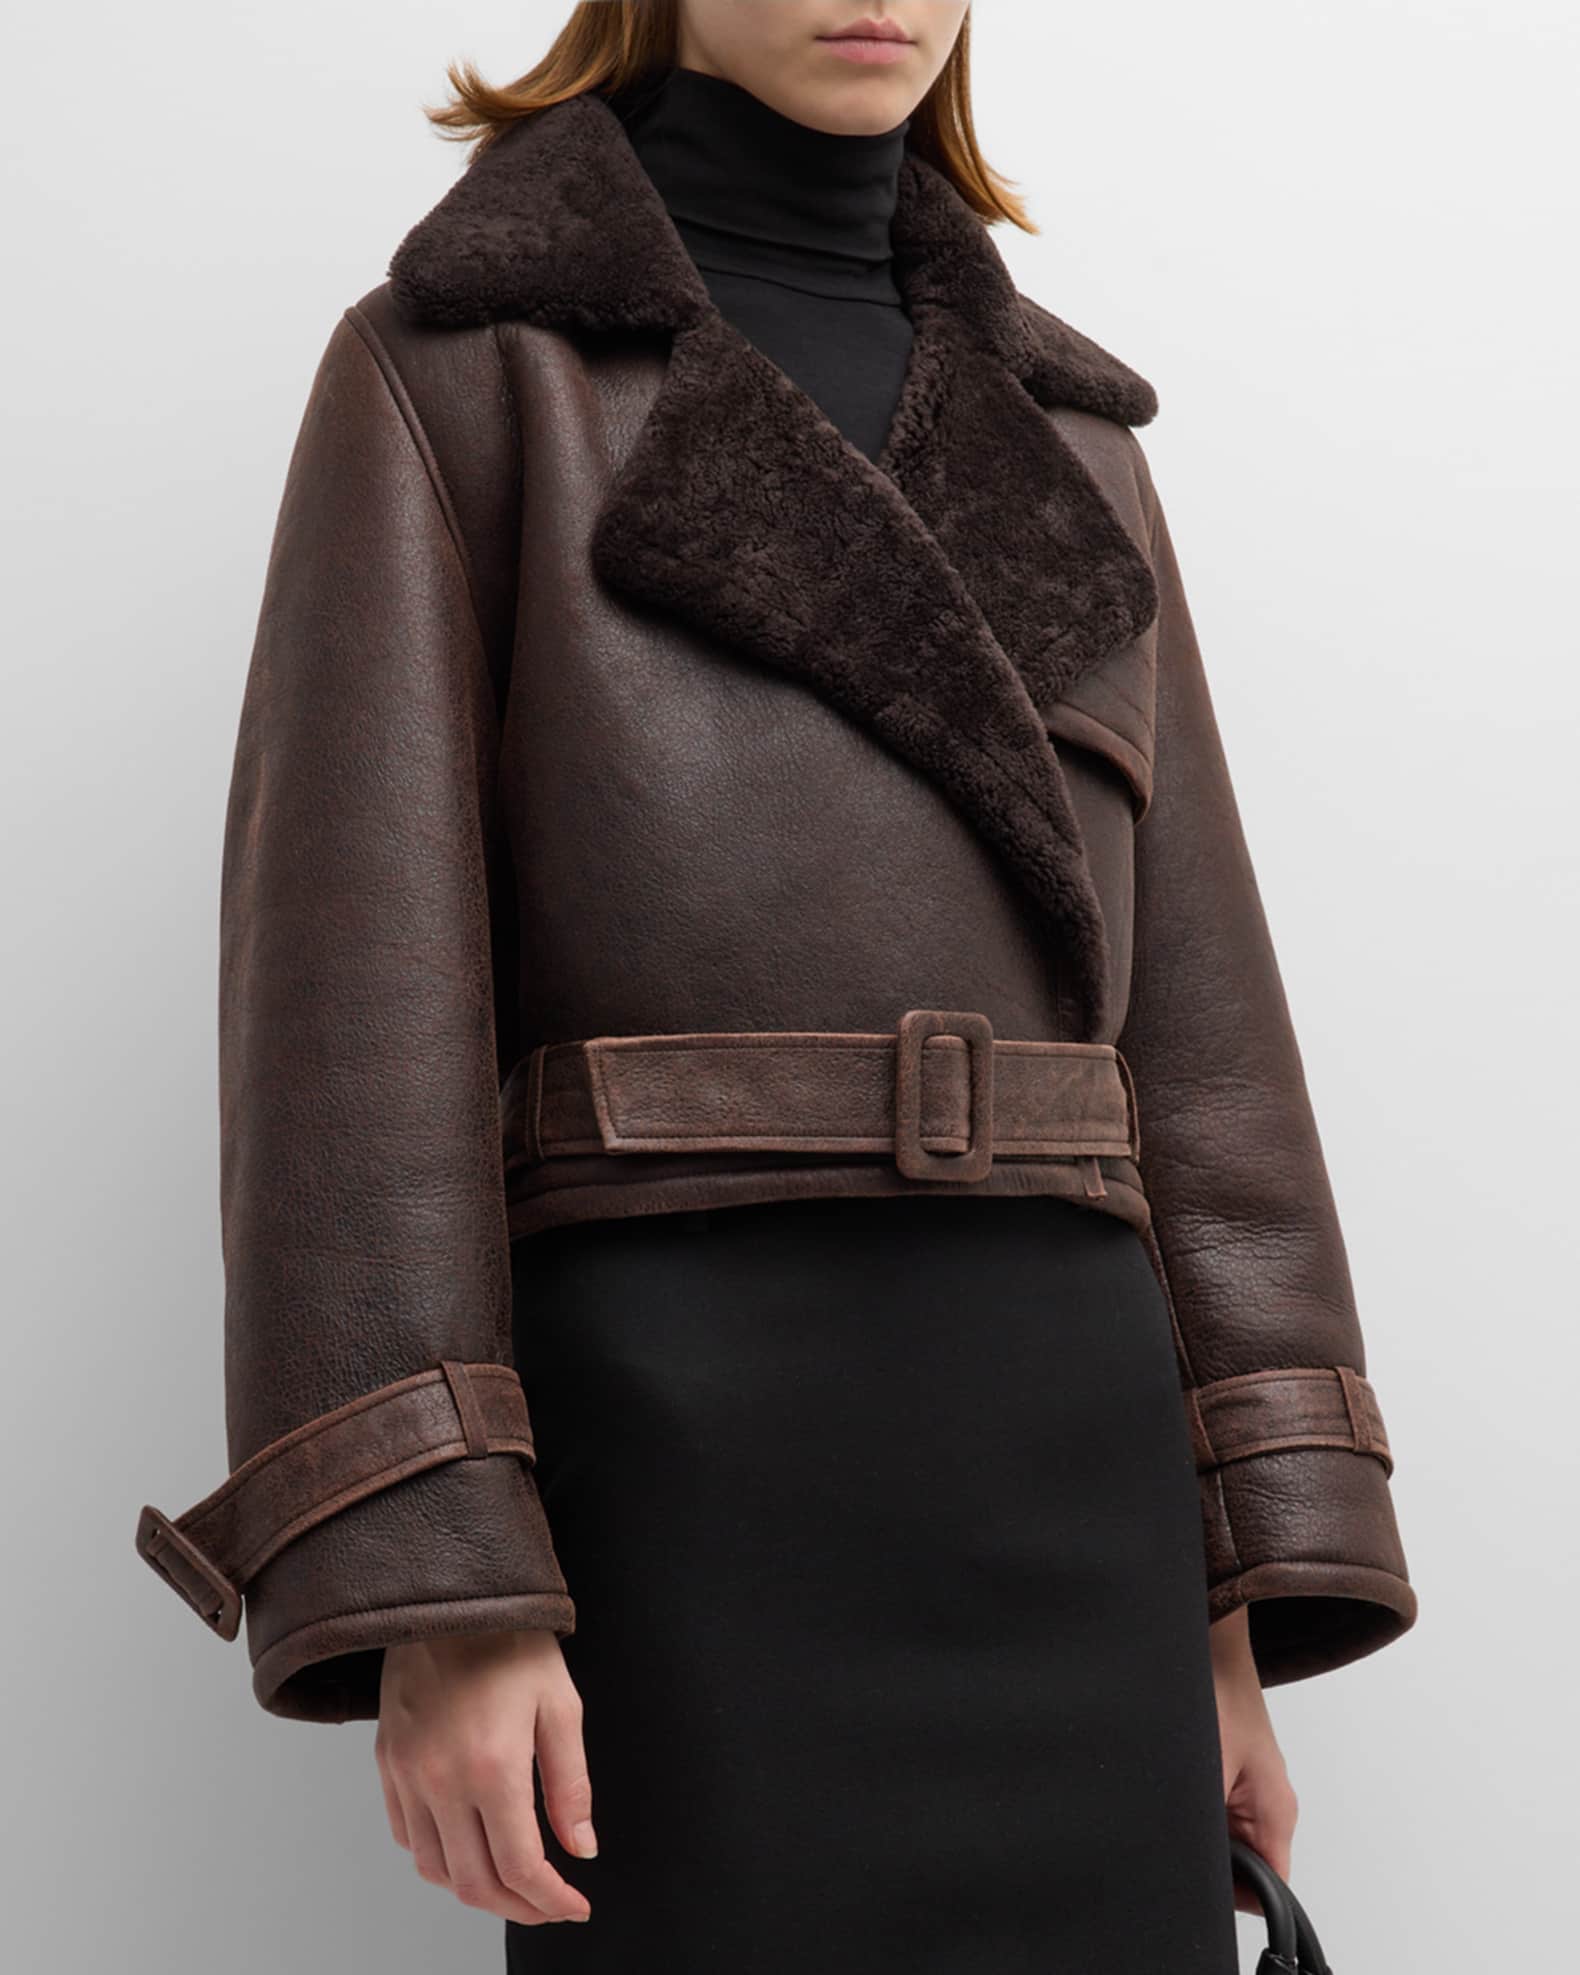 Discover Louis Vuitton Shearling Embossed Monogram Jacket: This